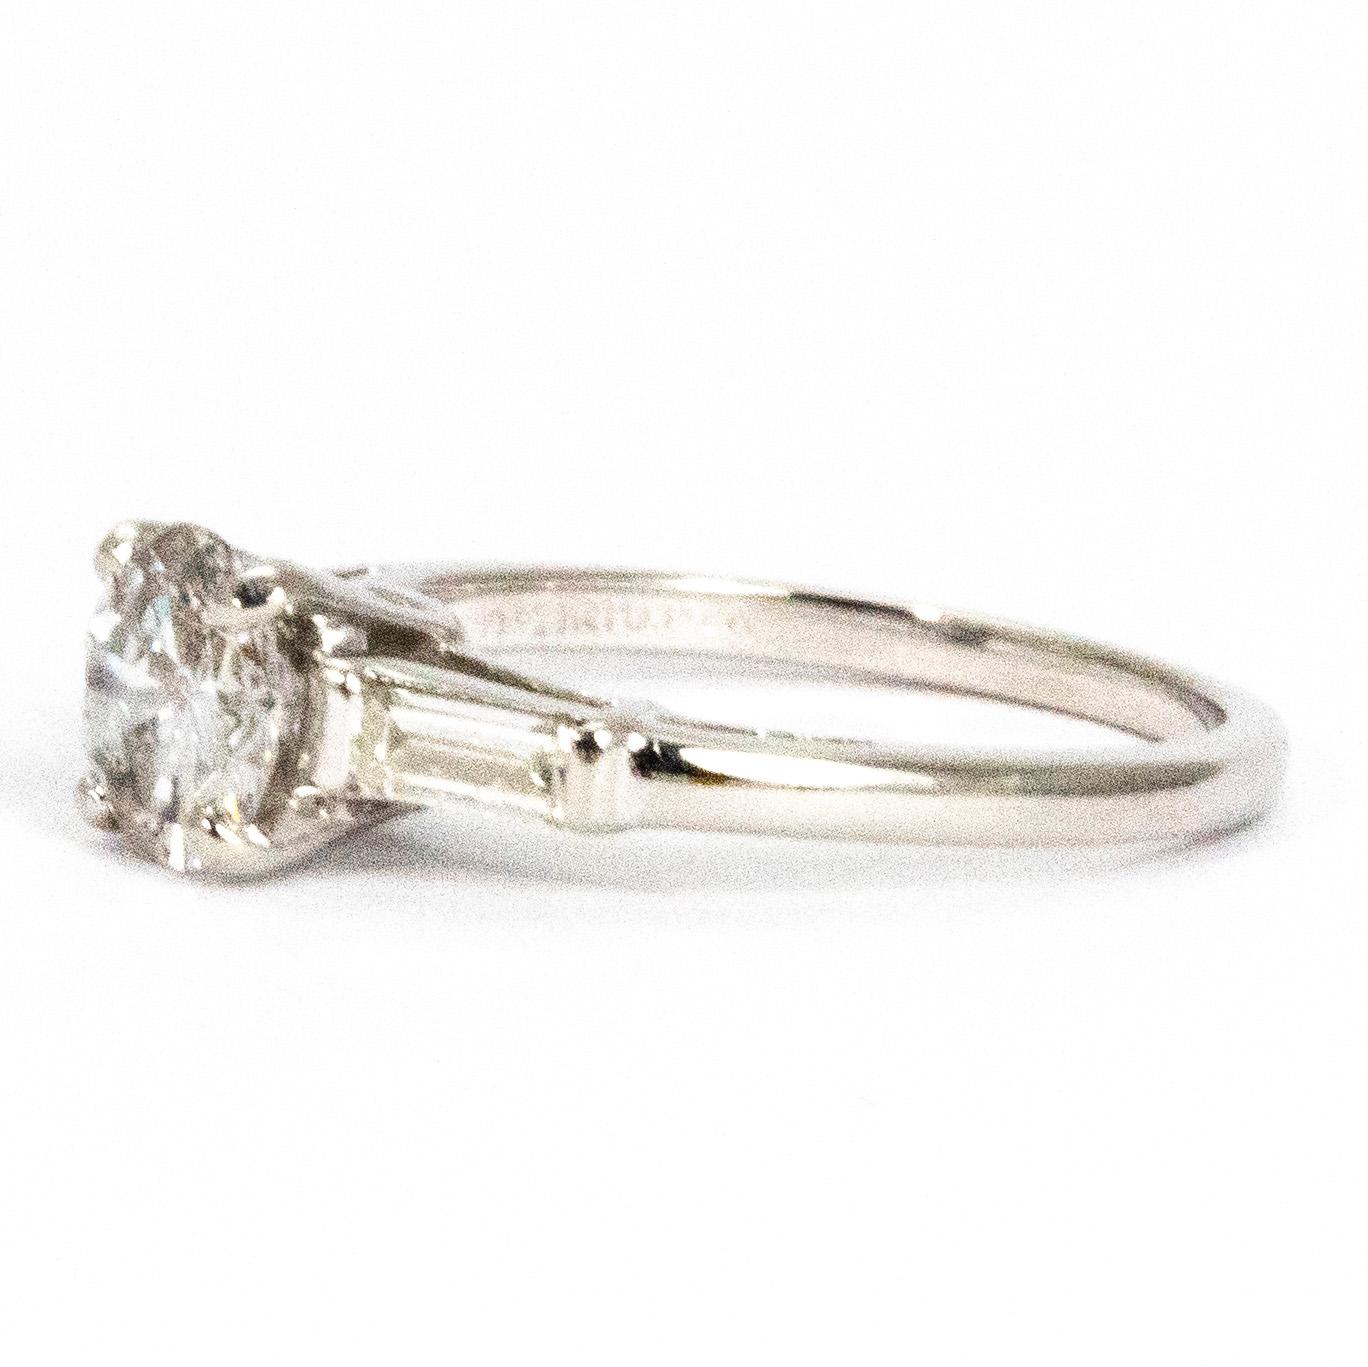 This gorgeous ring features a centre diamond which measures approximately 1carat and wither side of this stone there sits a baguette diamond. The centre stone is an H colour SI 1. The ring sits at a lovely height on the finger an the diamonds have a